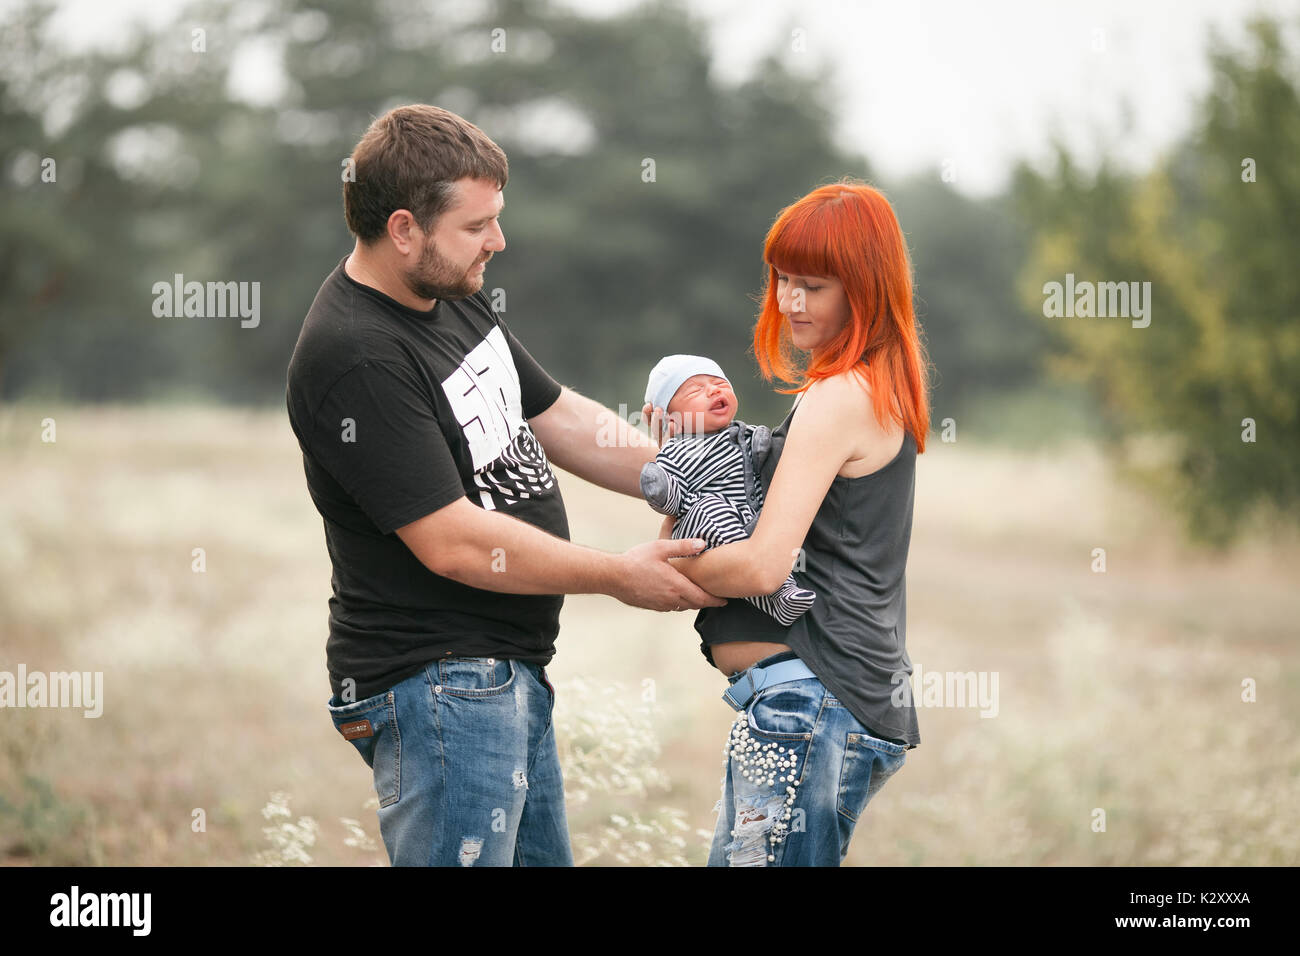 Happy young family with newborn baby on walk in park. Mother holds in her hands crying newborn baby, father stands near. Stock Photo